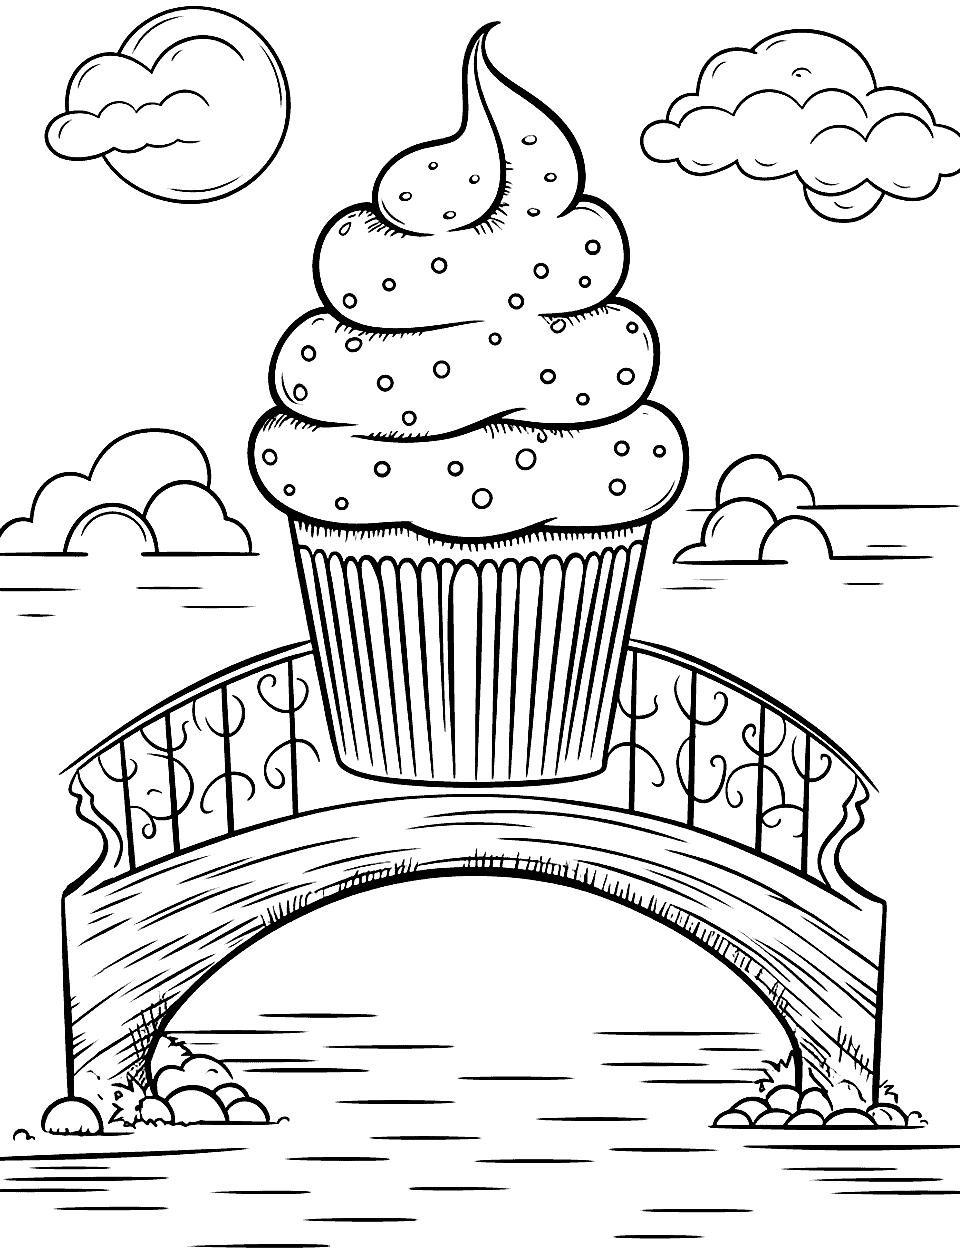 Cupcake and a Bridge Coloring Page - A scene with a cupcake and a magical bridge.